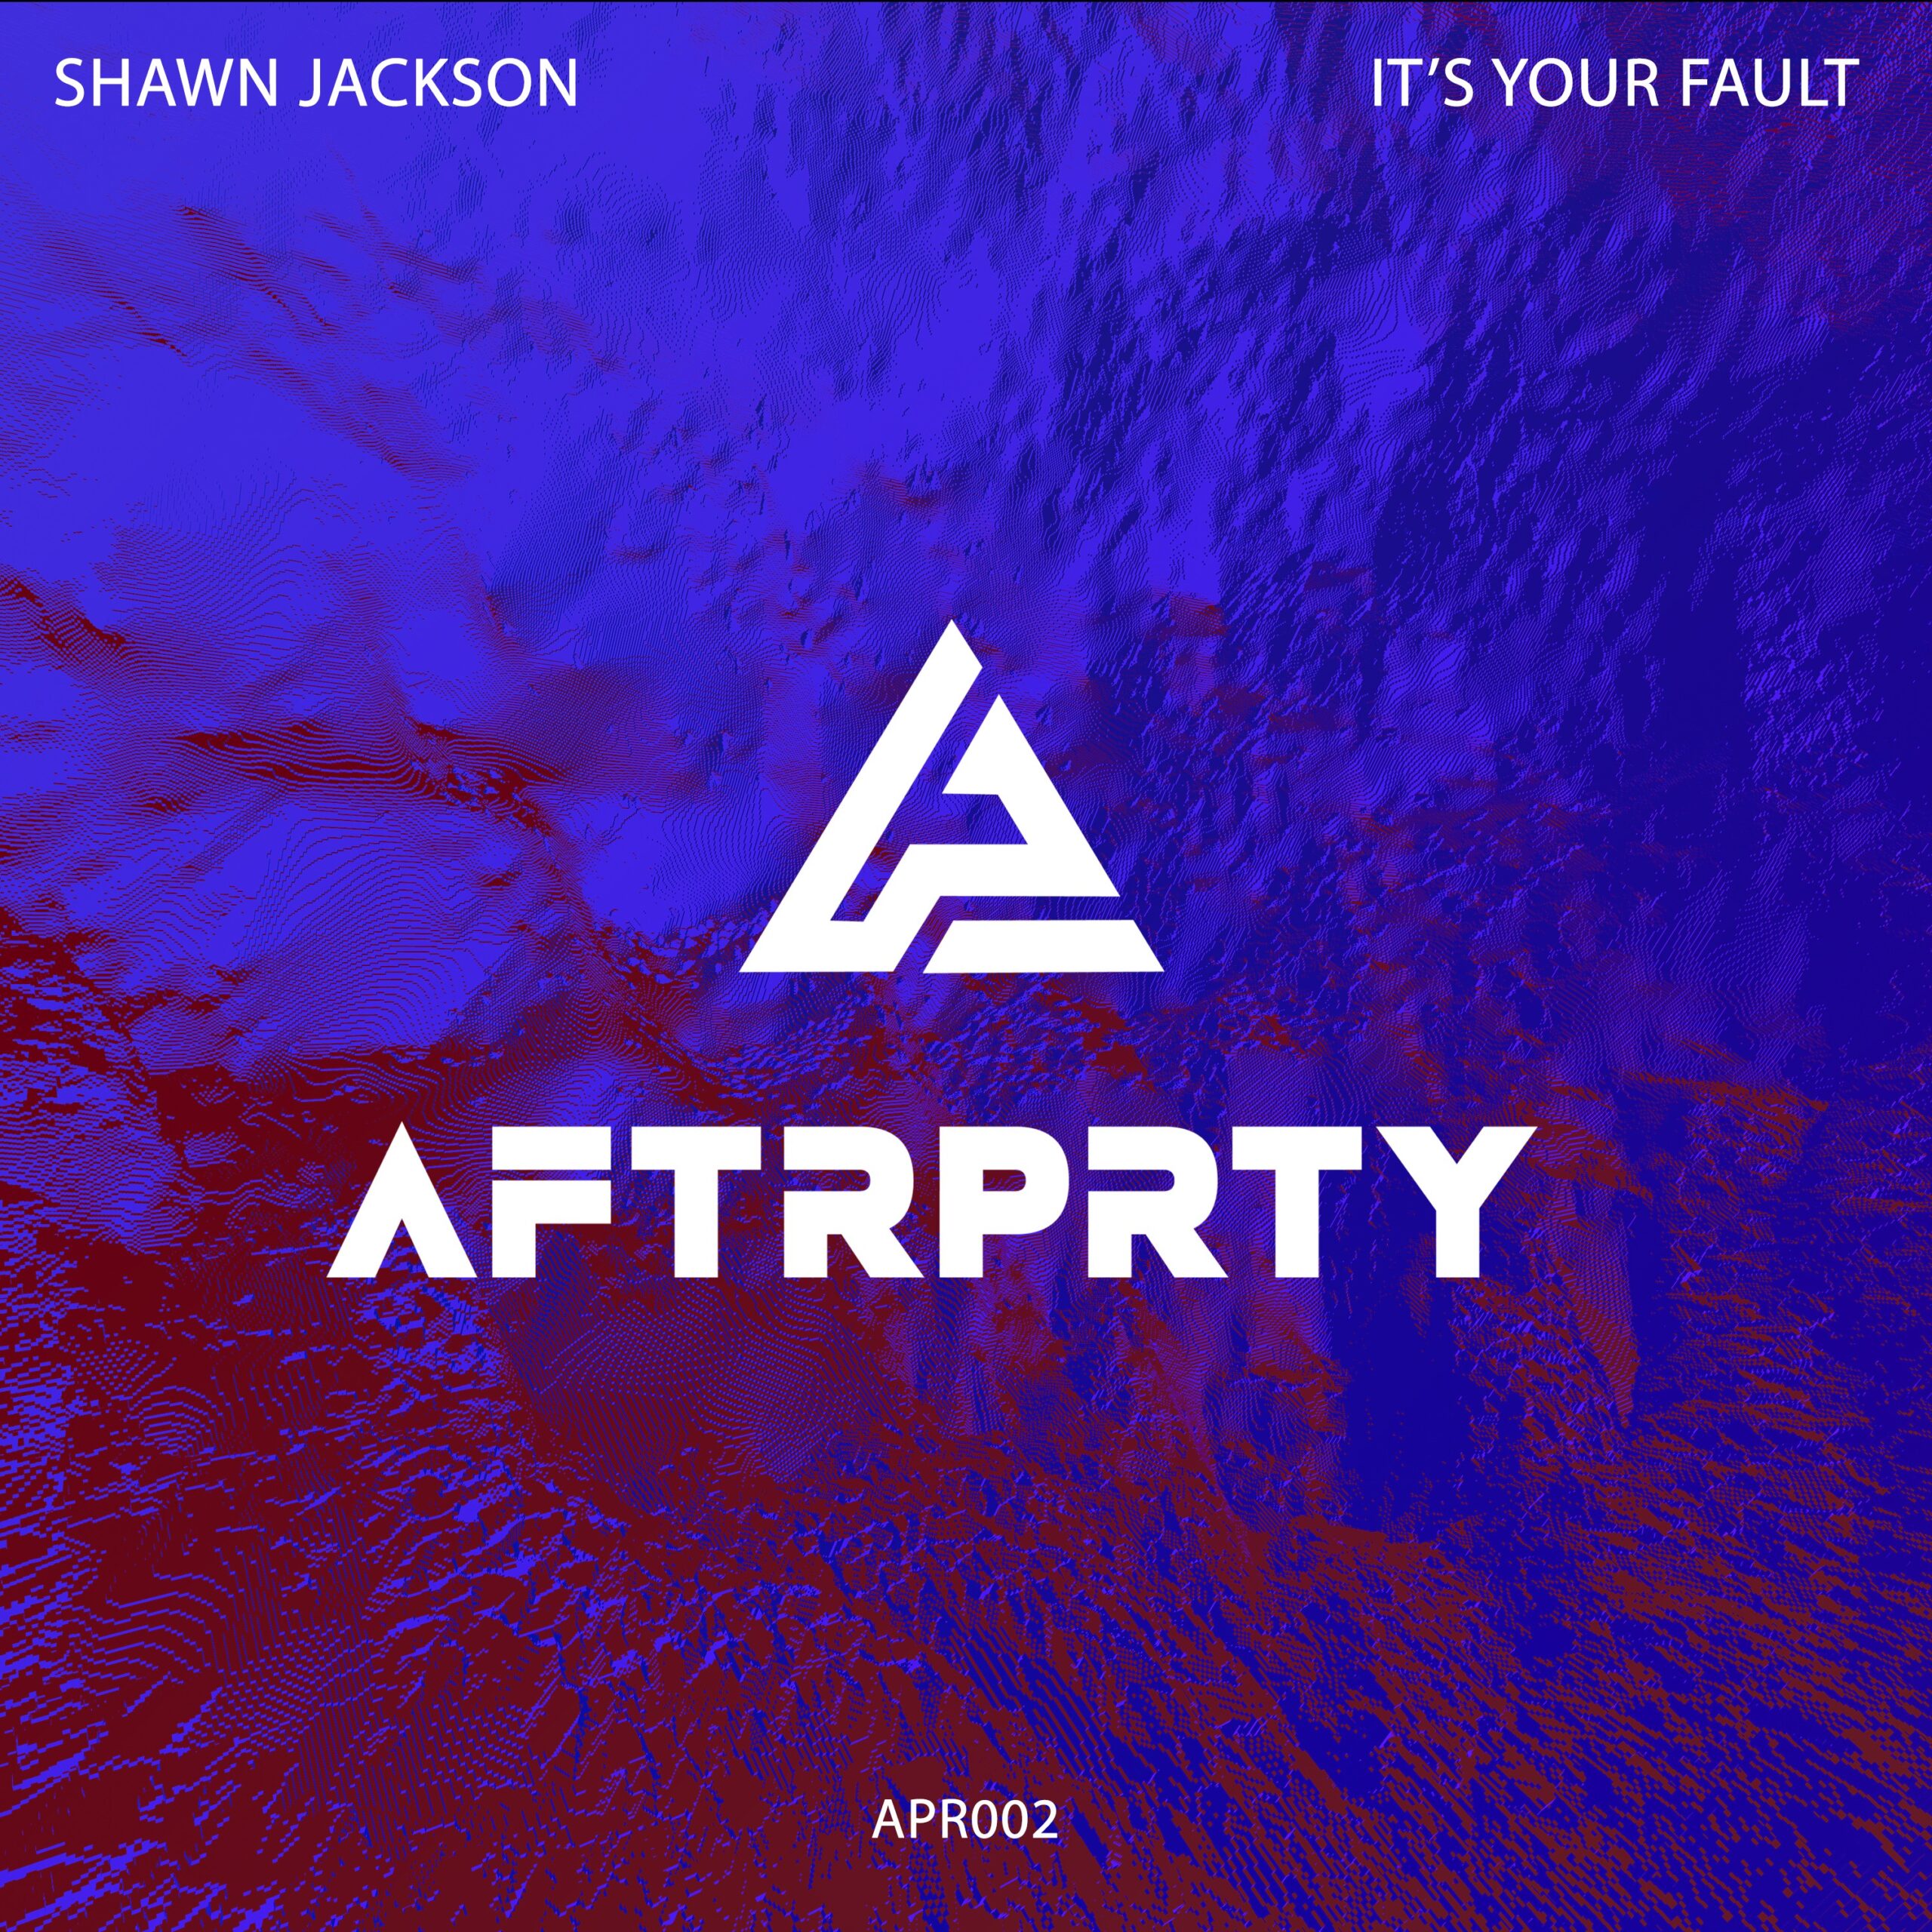 Listen Now to Shawn Jackson's Exciting New Track "It's Your Fault"